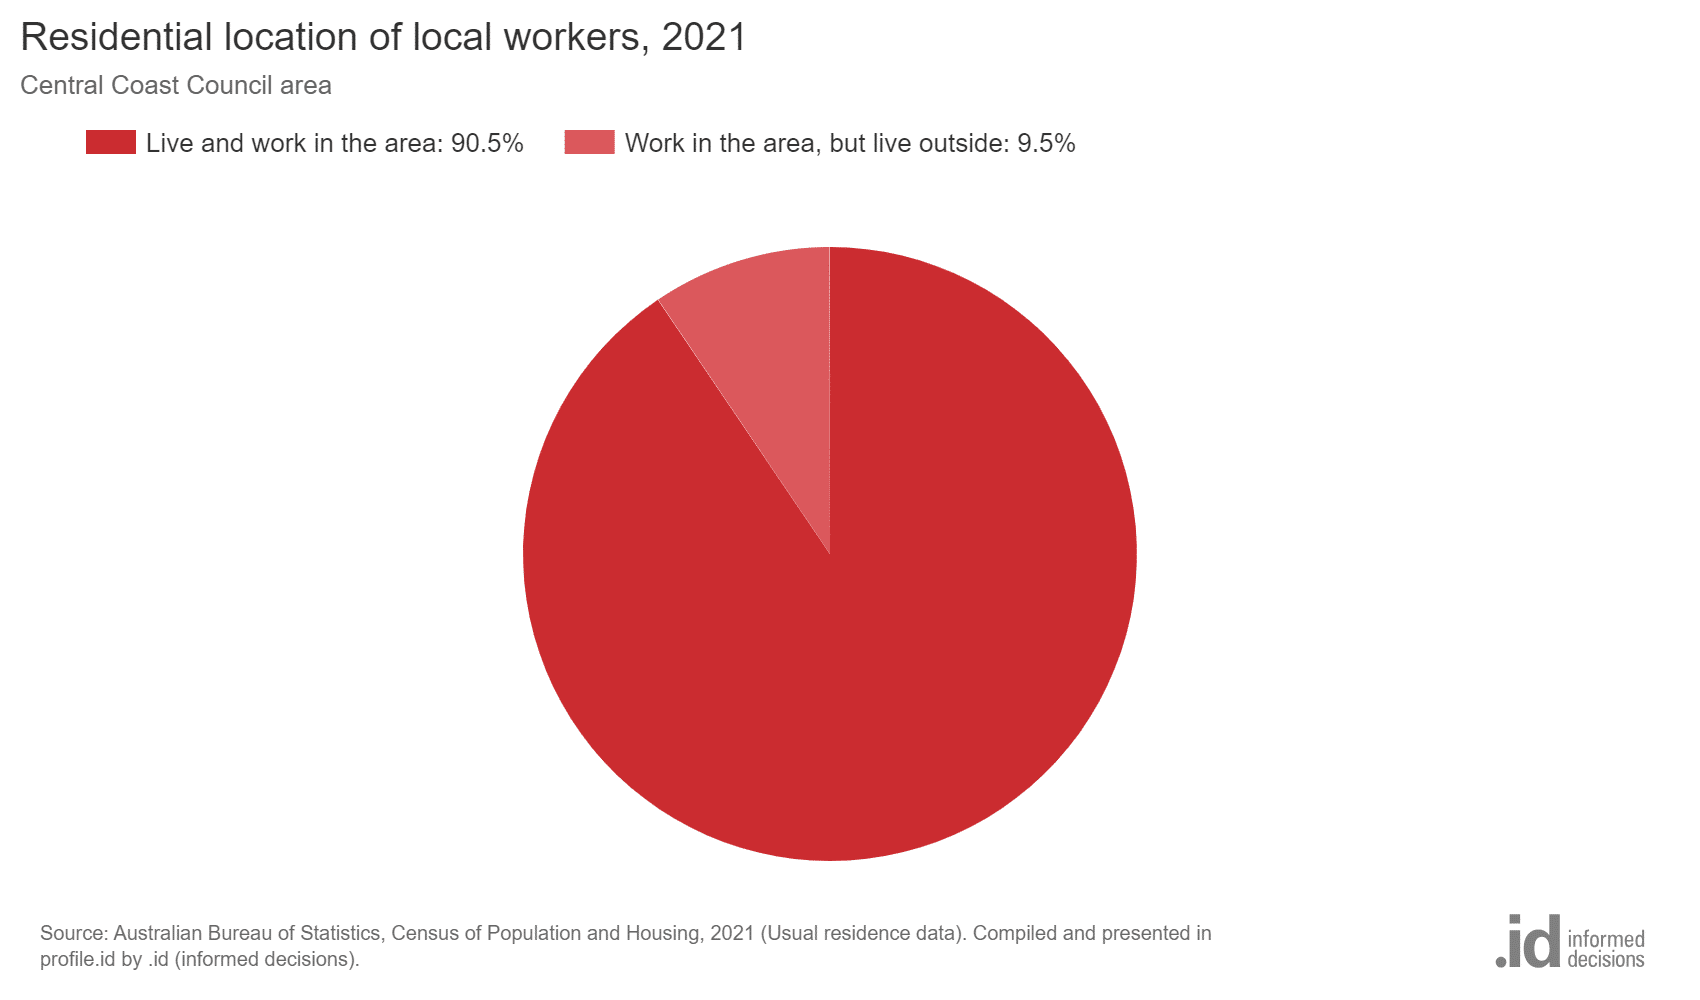 A pie chart showing the residential location of local workers in the Central Coast Council area in 2021. It shows: - 90.5% live and work in the area - 9.5% work in the area, but live outside The source is the Australian Bureau of Statistics, from its 2021 Census of Population and Housing.